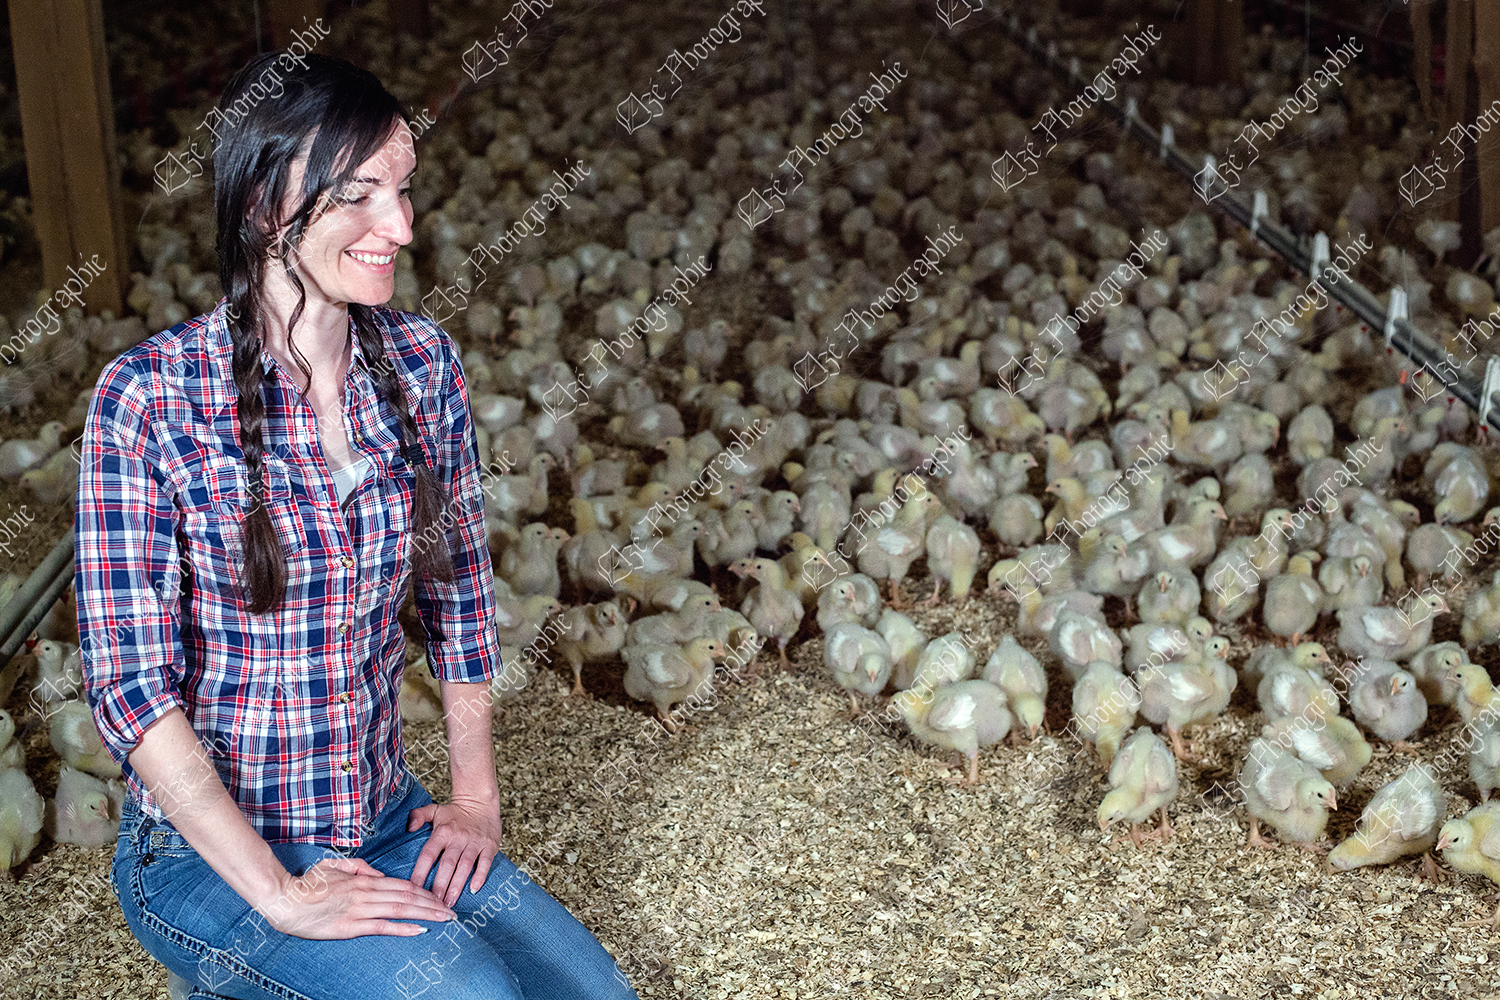 elze_photo_9047_agricultrice_heureuse_poulets_chicken_coop_lady